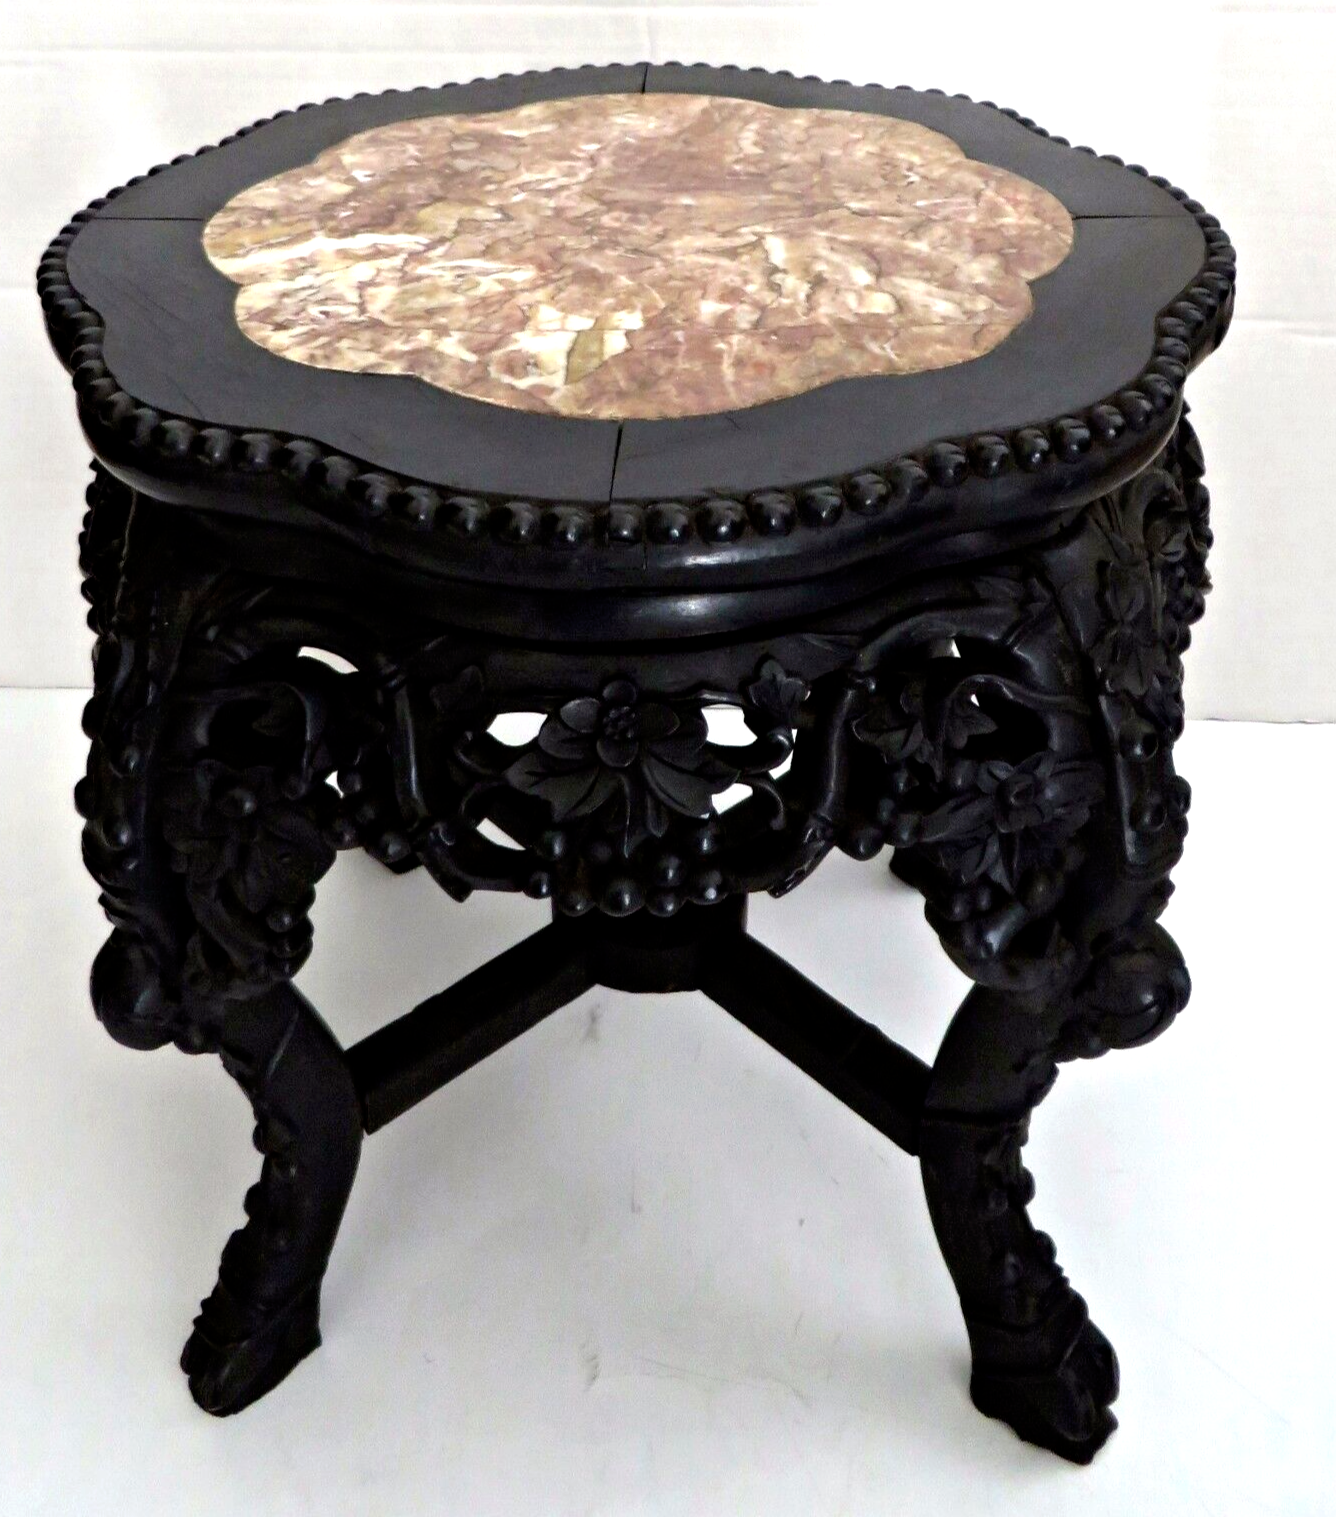 Antique 1870's Oriental Chinese Carved Wood Marble Top Side Table Plant Stand Без бренда - фотография #2